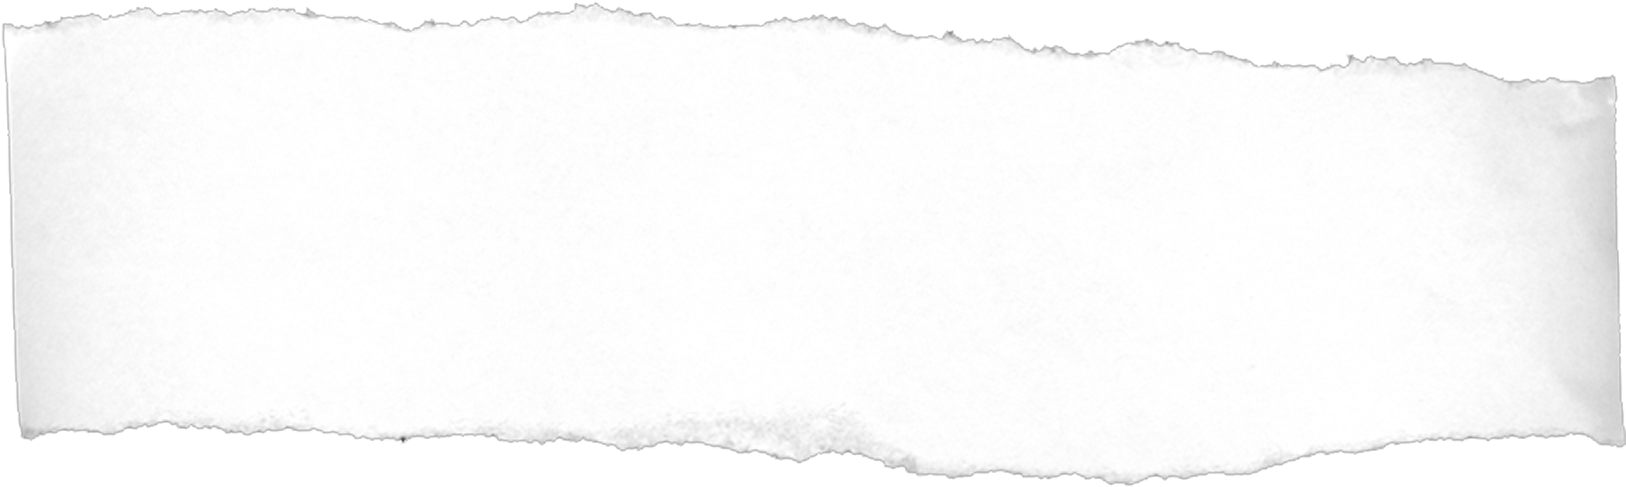 Download Paper Page 30 Images Ripped Paper Effect Photoshop Png Png Image With No Background Pngkey Com